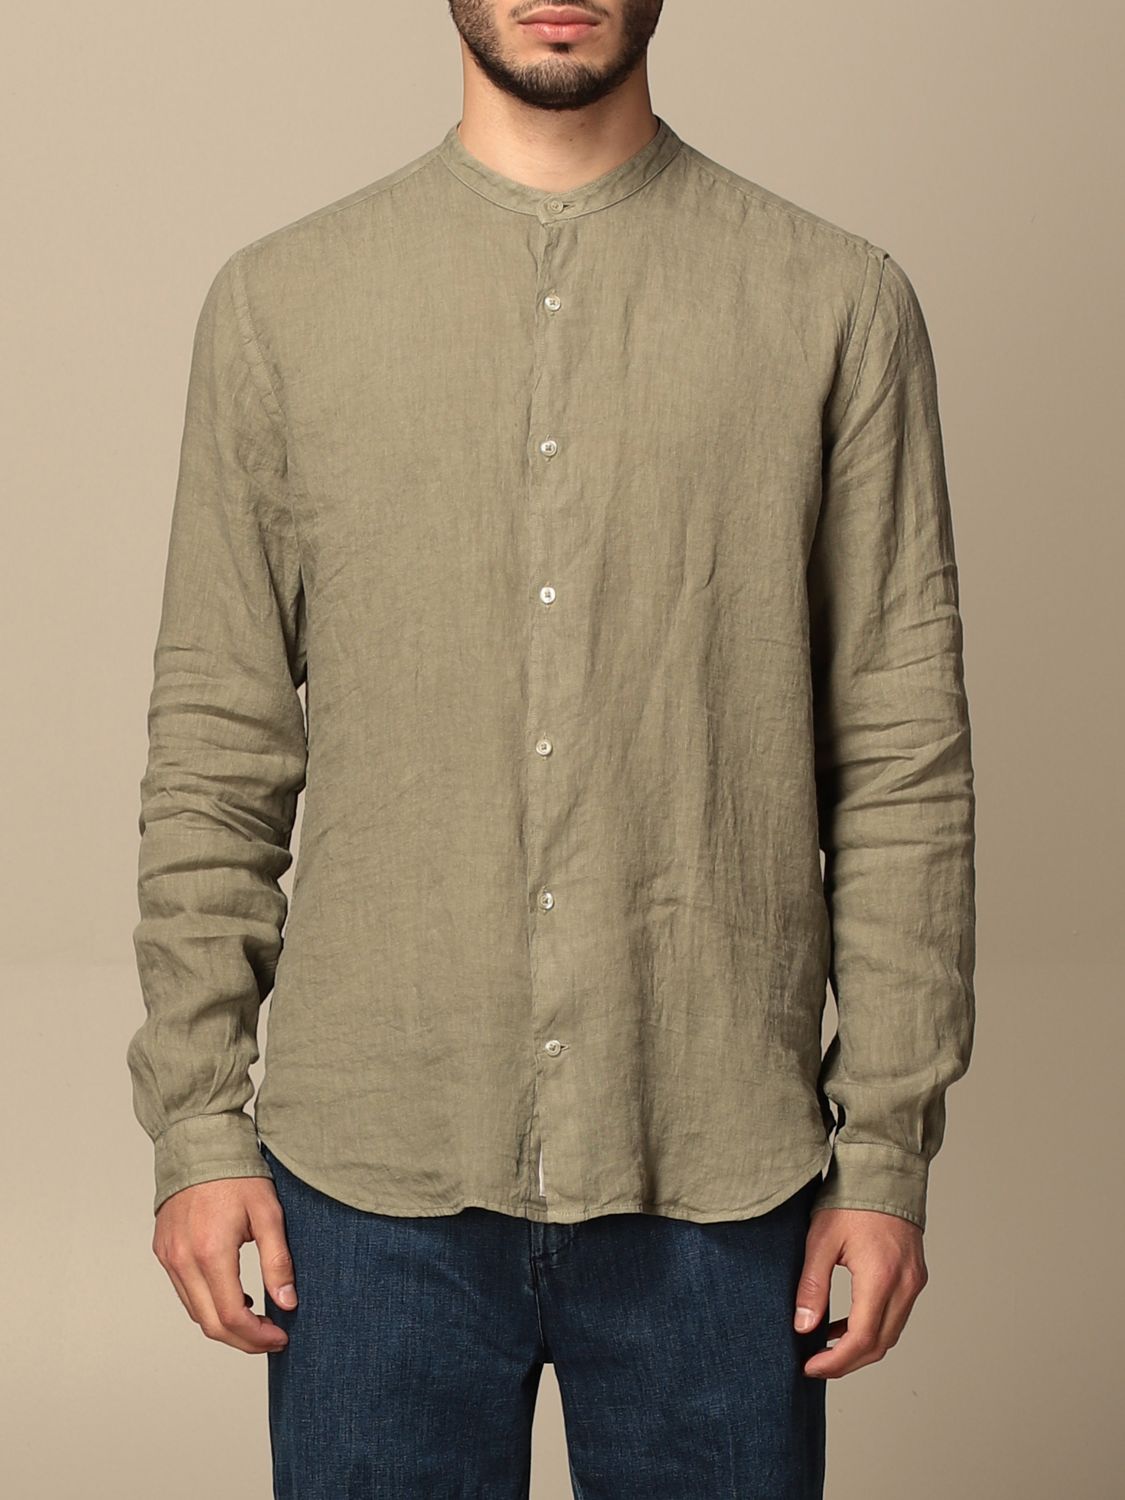 Brooksfield Outlet: shirt in linen with mandarin collar - Sage ...